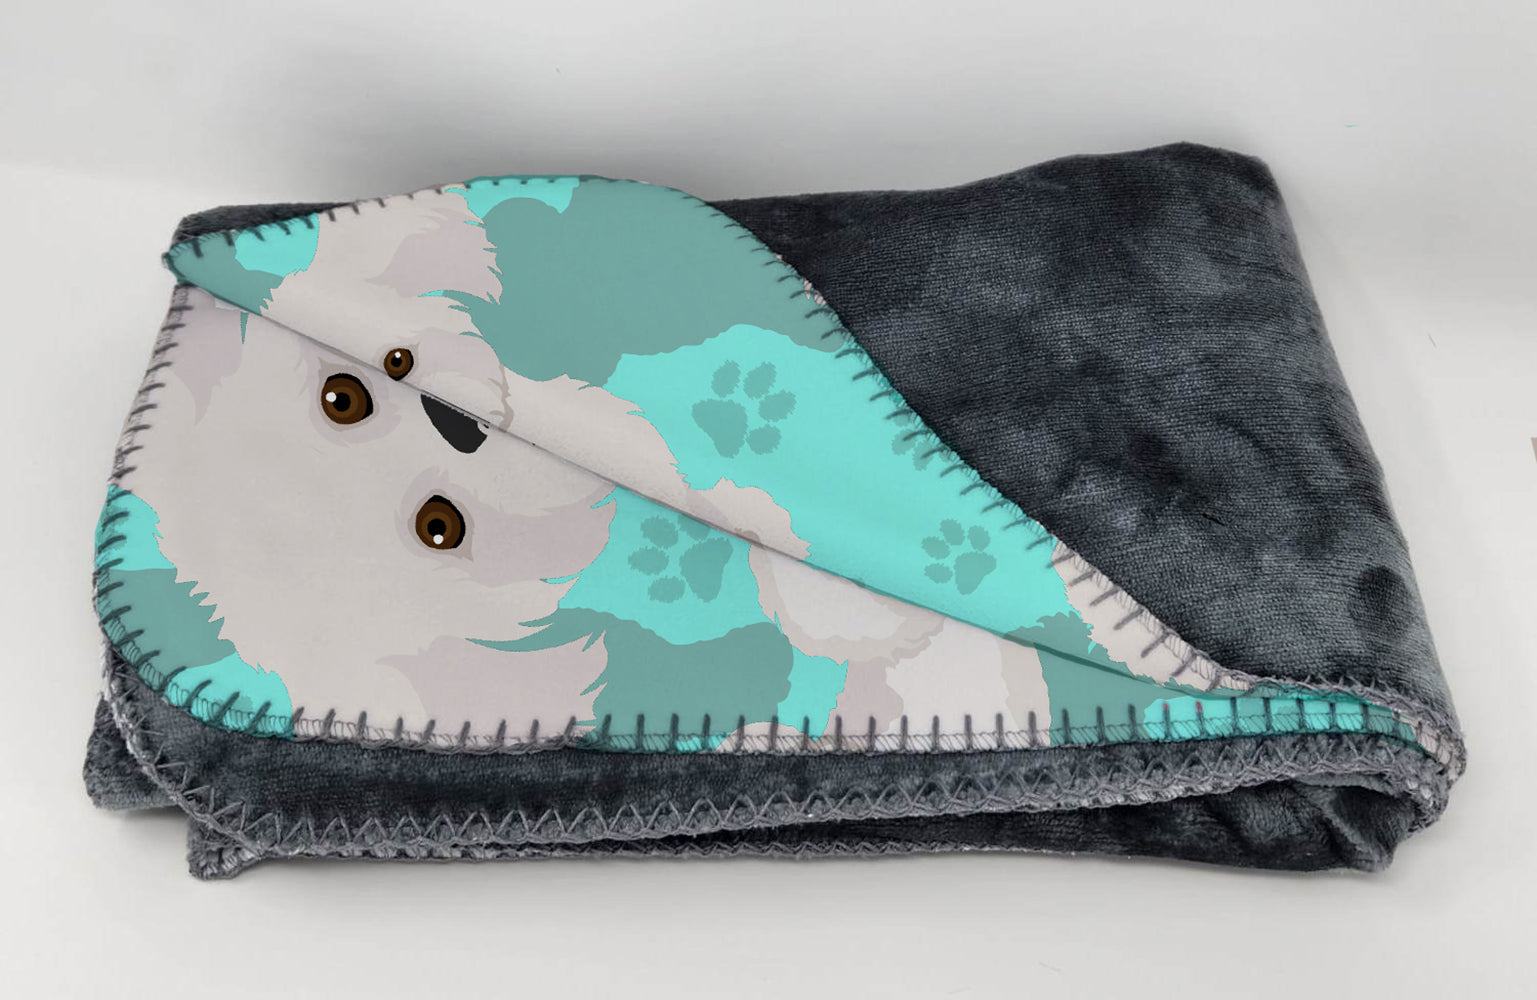 Buy this Bichon Frise Soft Travel Blanket with Bag